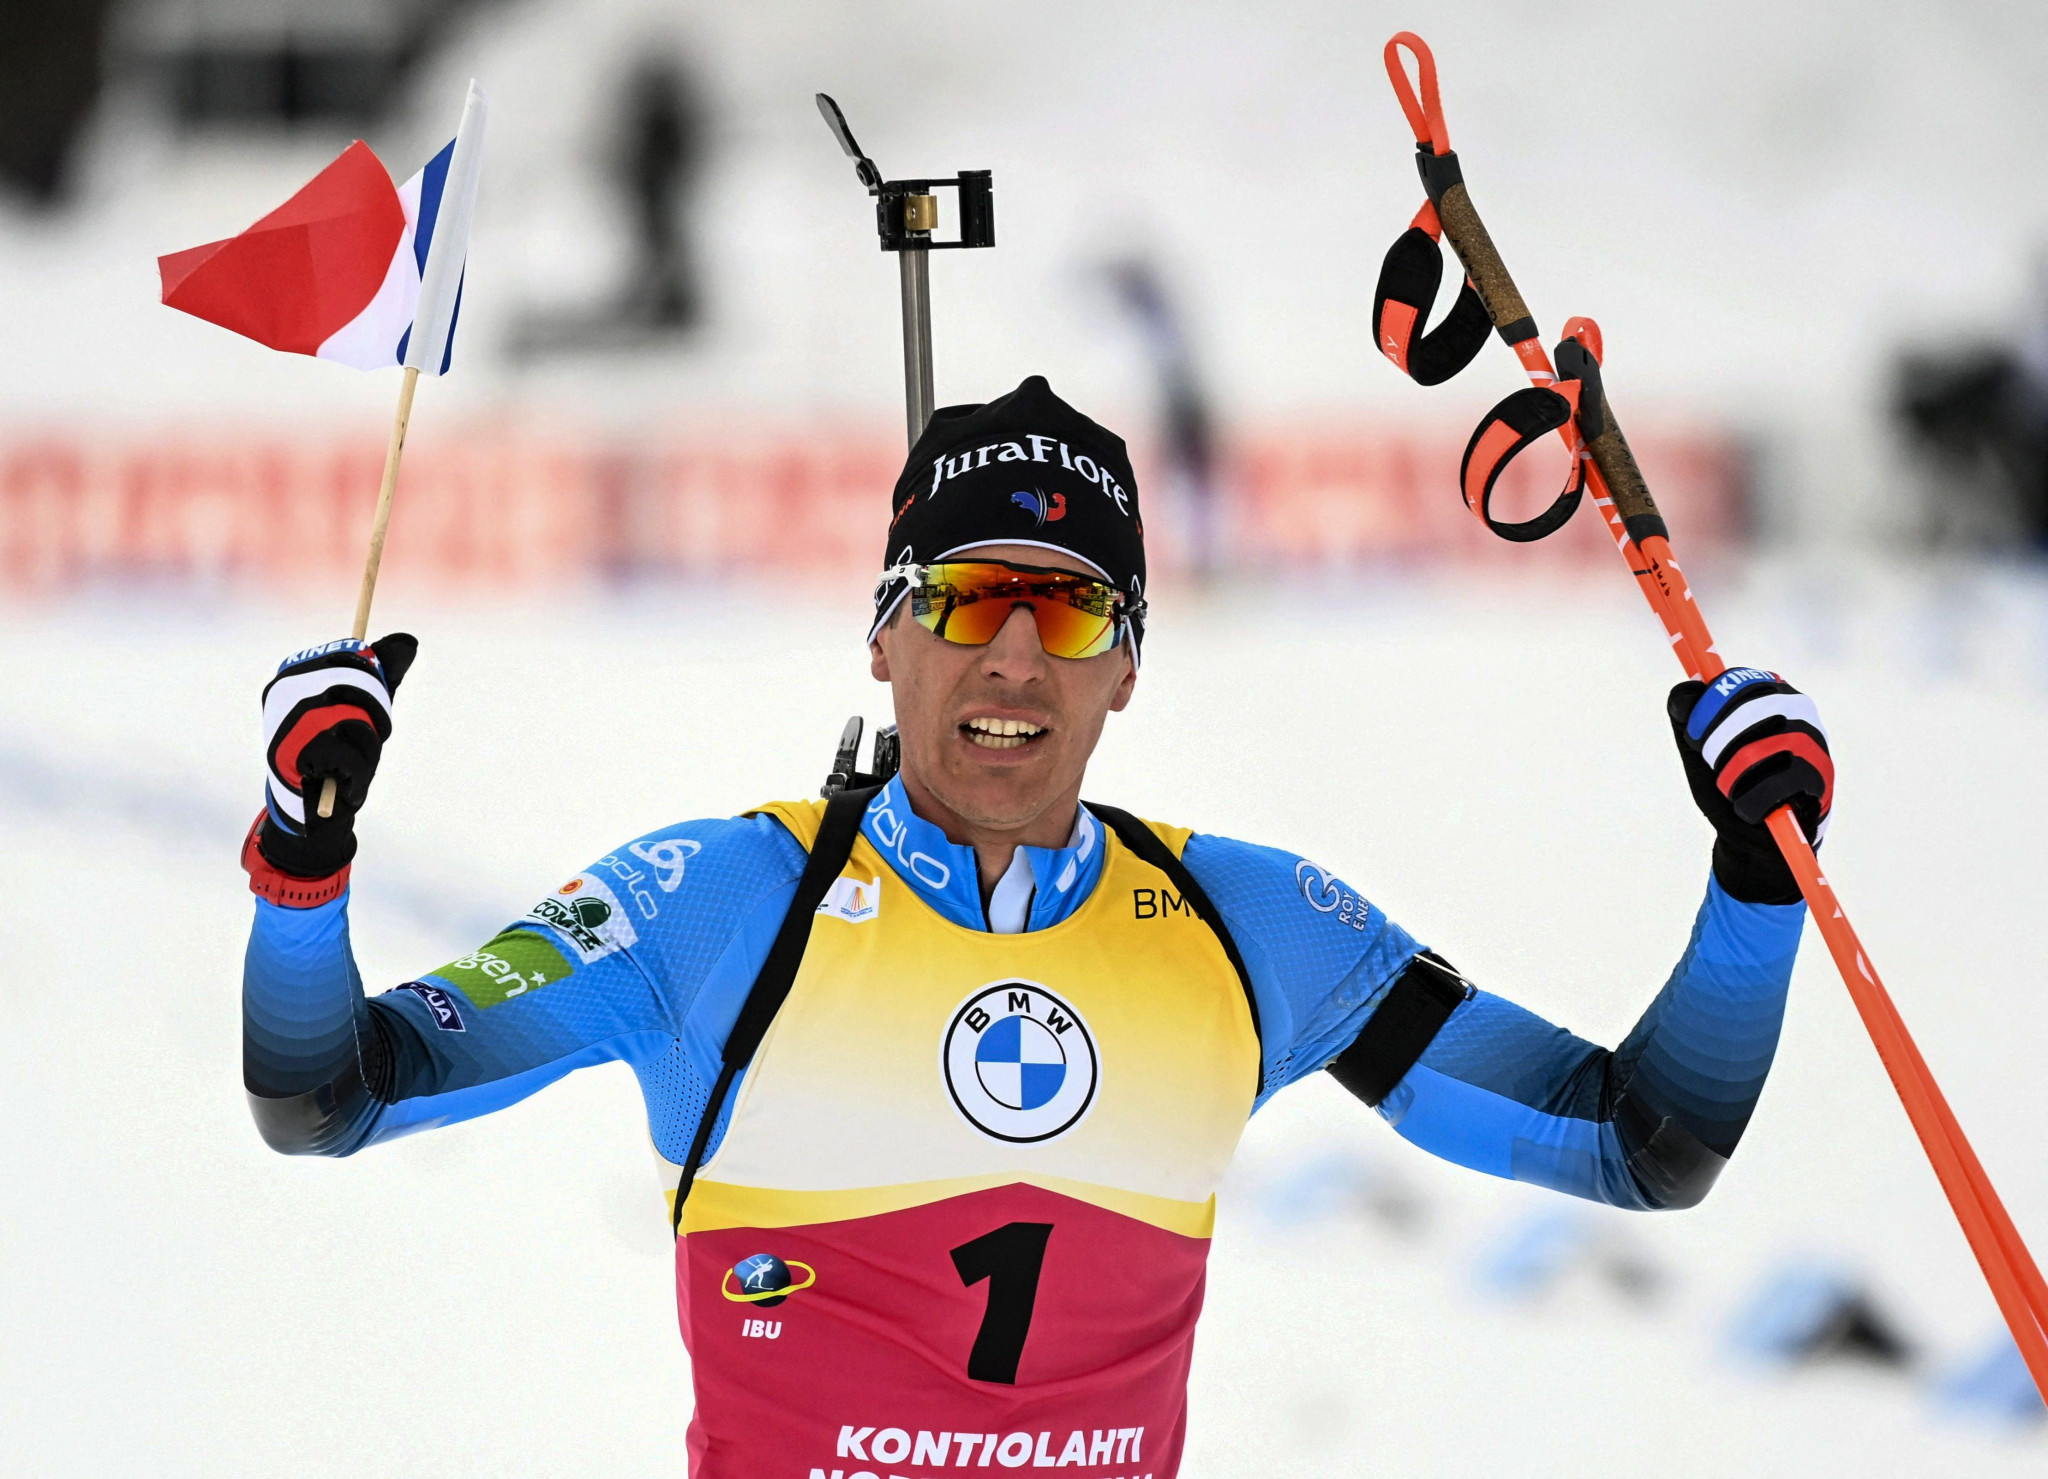 Quentin Fillon Maillet of France wins the men's sprint 10 kilometres competition in Otepää, Estonia ©Getty Images